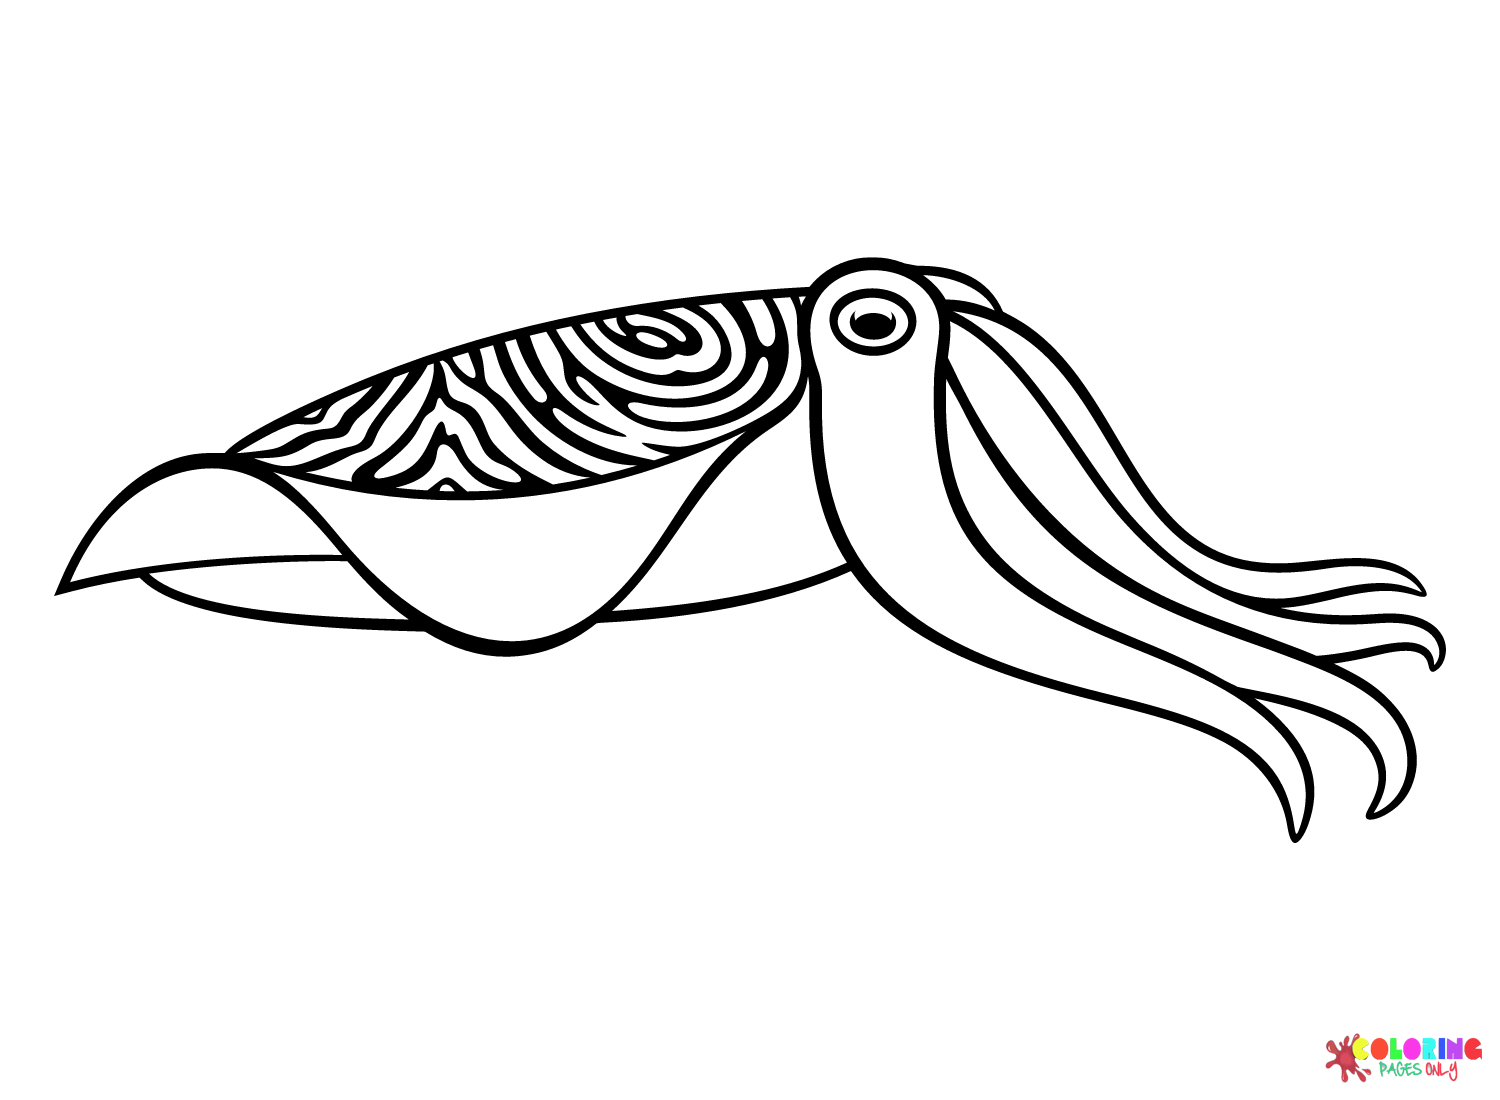 Pharaoh Cuttlefish Coloring Page